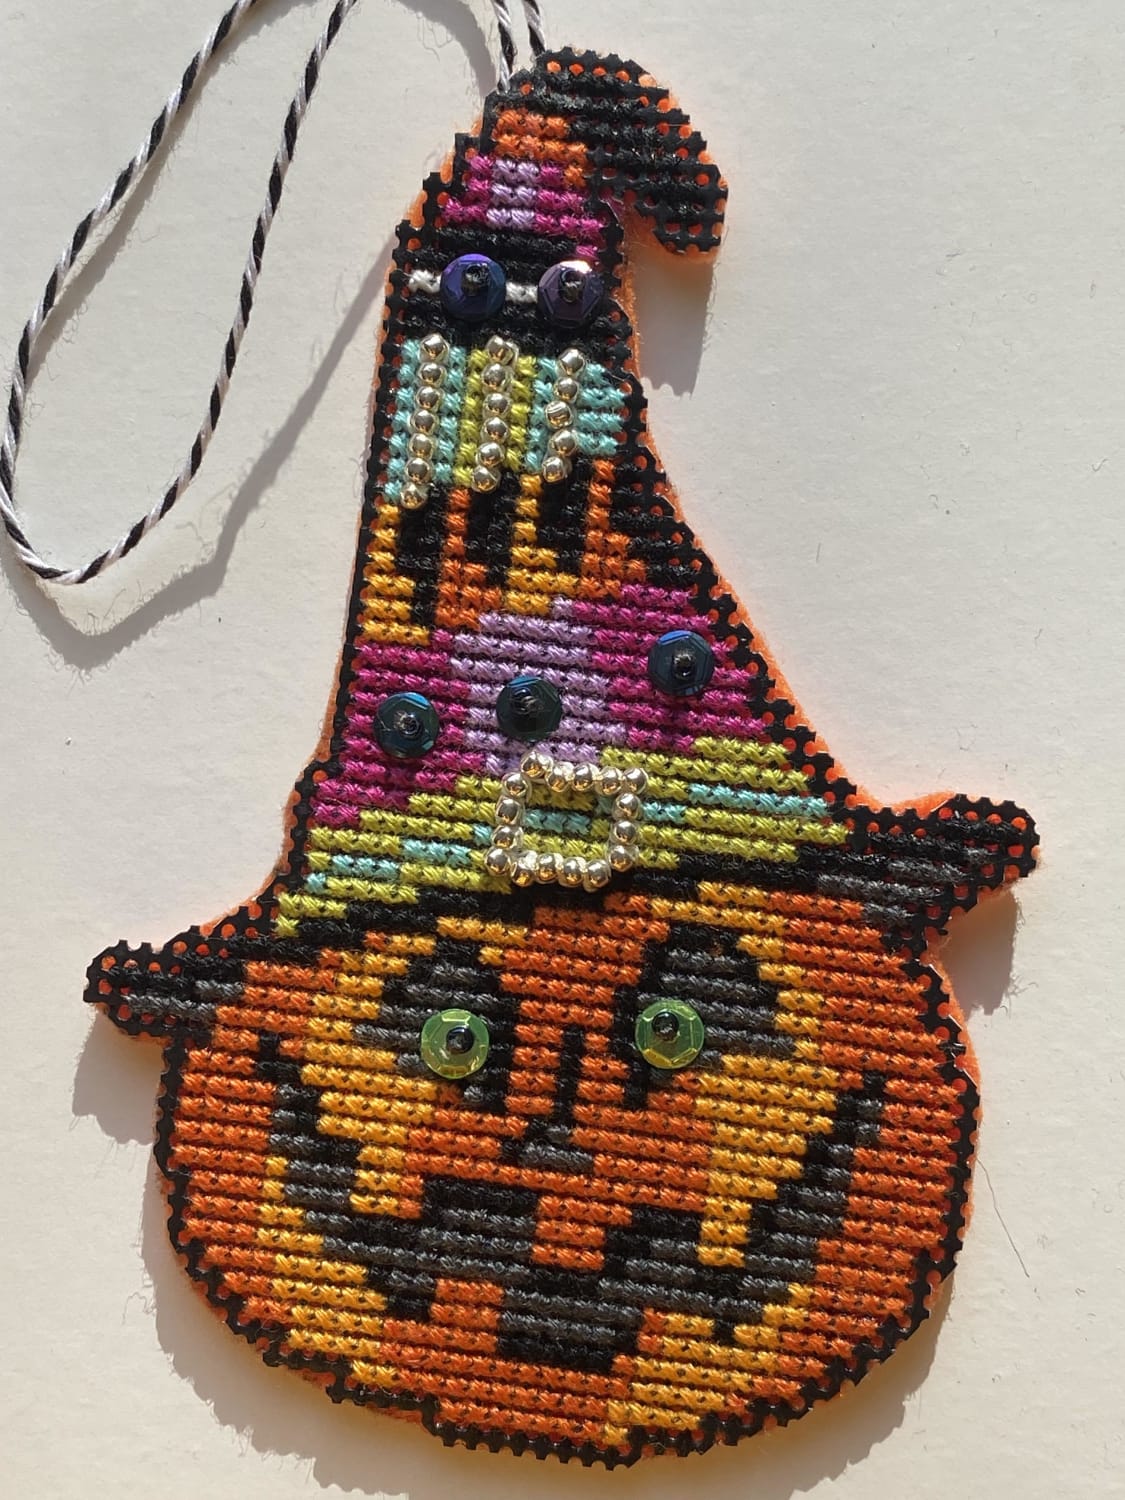 [FO] Finally finished the backing on this fun ornament! 🎃🎃 Pattern is Miss Witch from Satsuma Street.